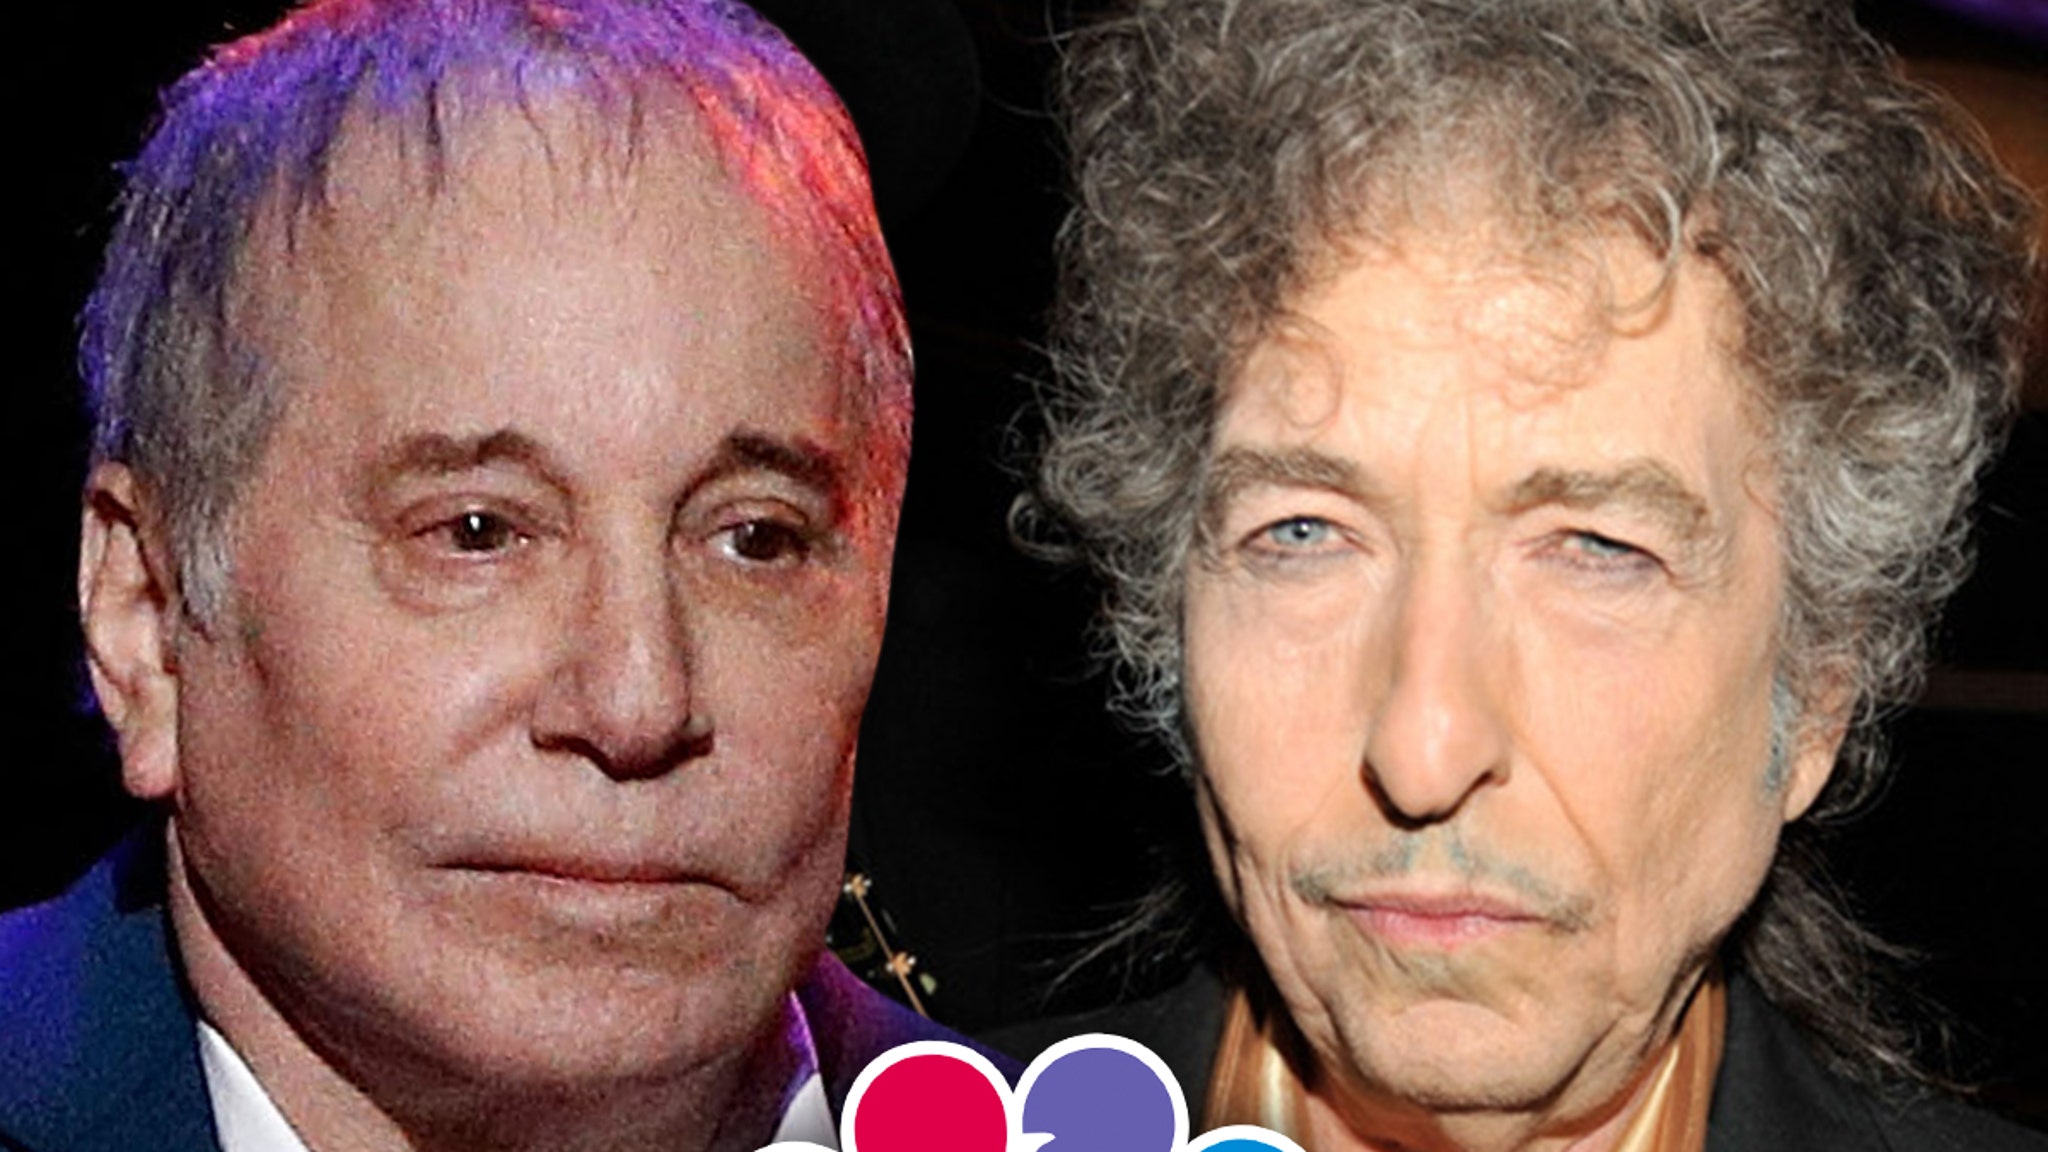 Paul Simon will be a ‘footnote’ next to Bob Dylan, says NBC writer